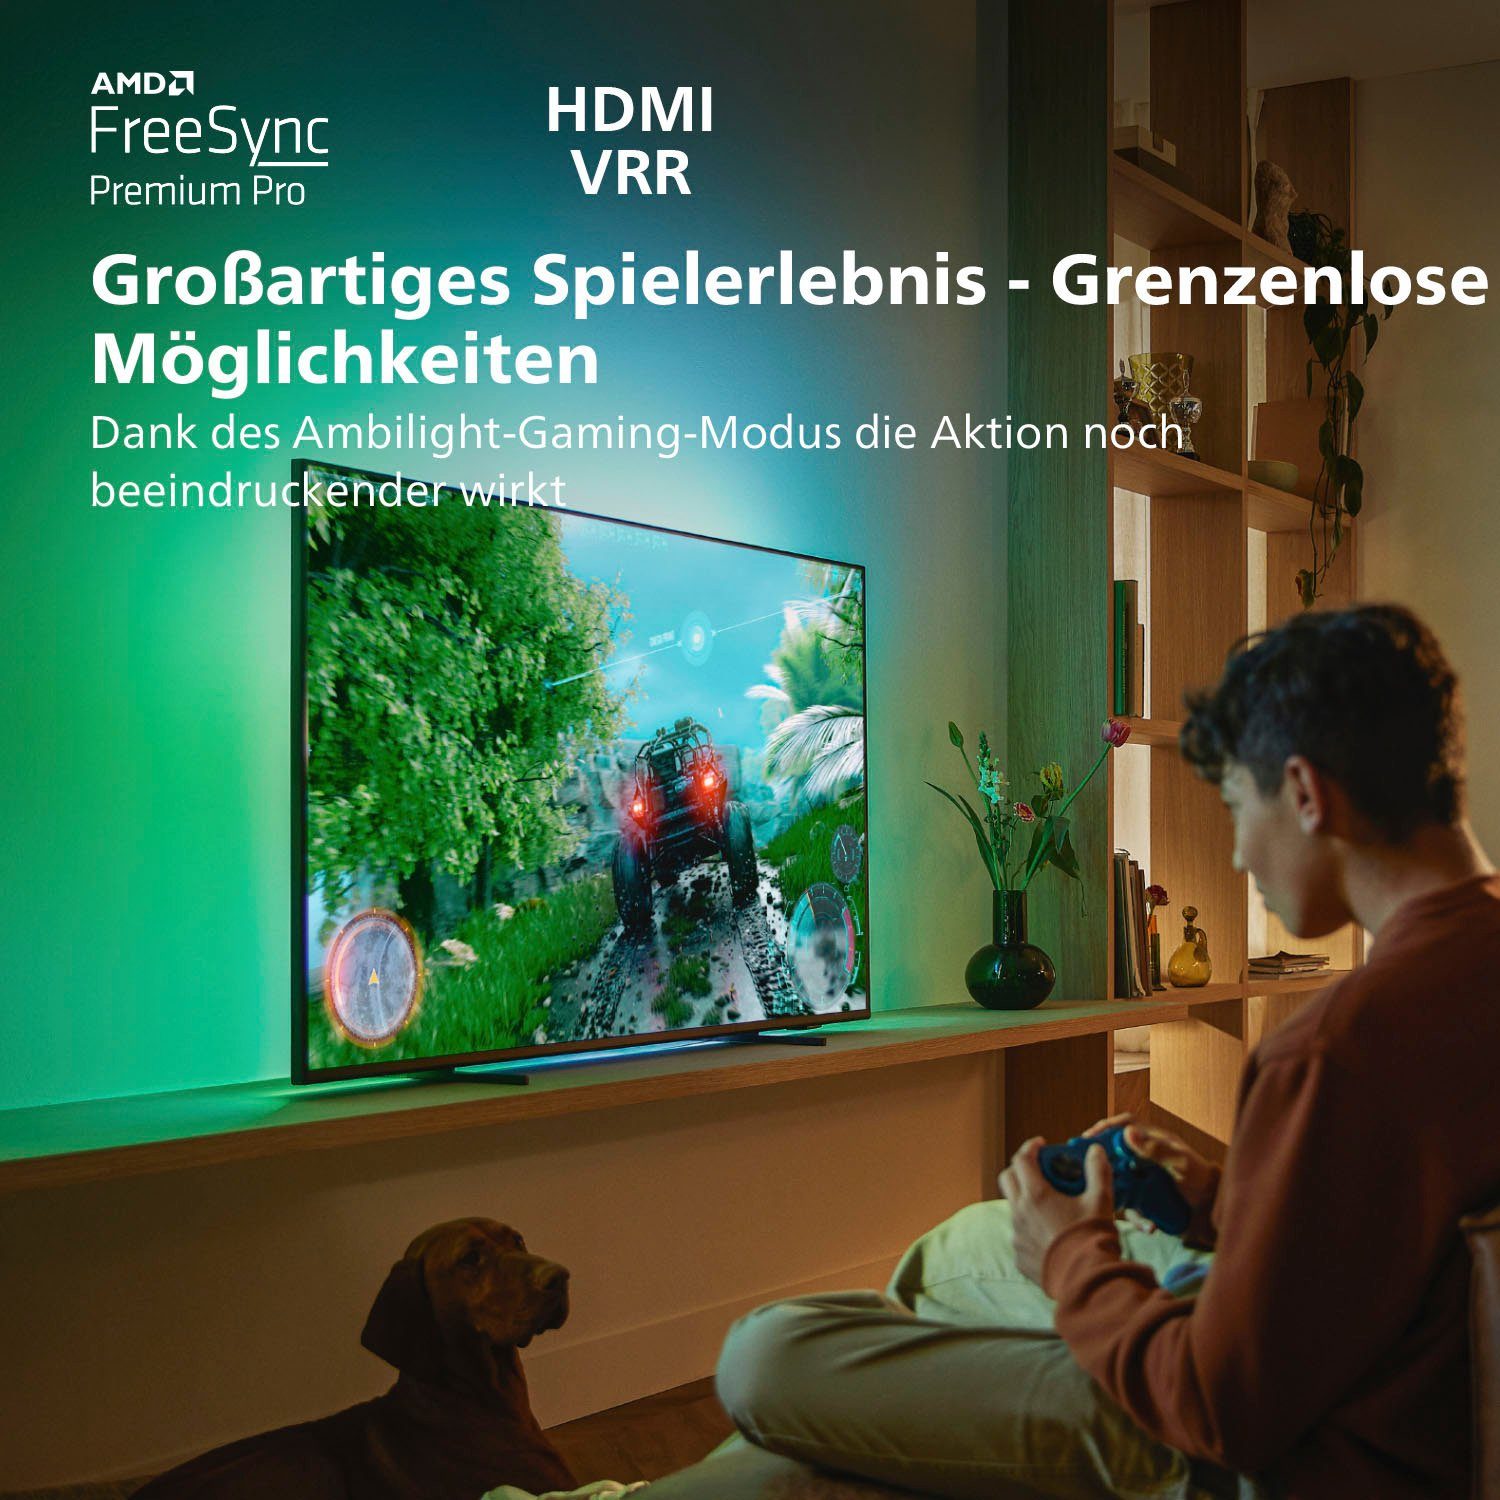 4K Zoll, cm/55 55PML9507/12 Smart-TV) Philips (139 TV, HD, Ultra LED-Fernseher Android